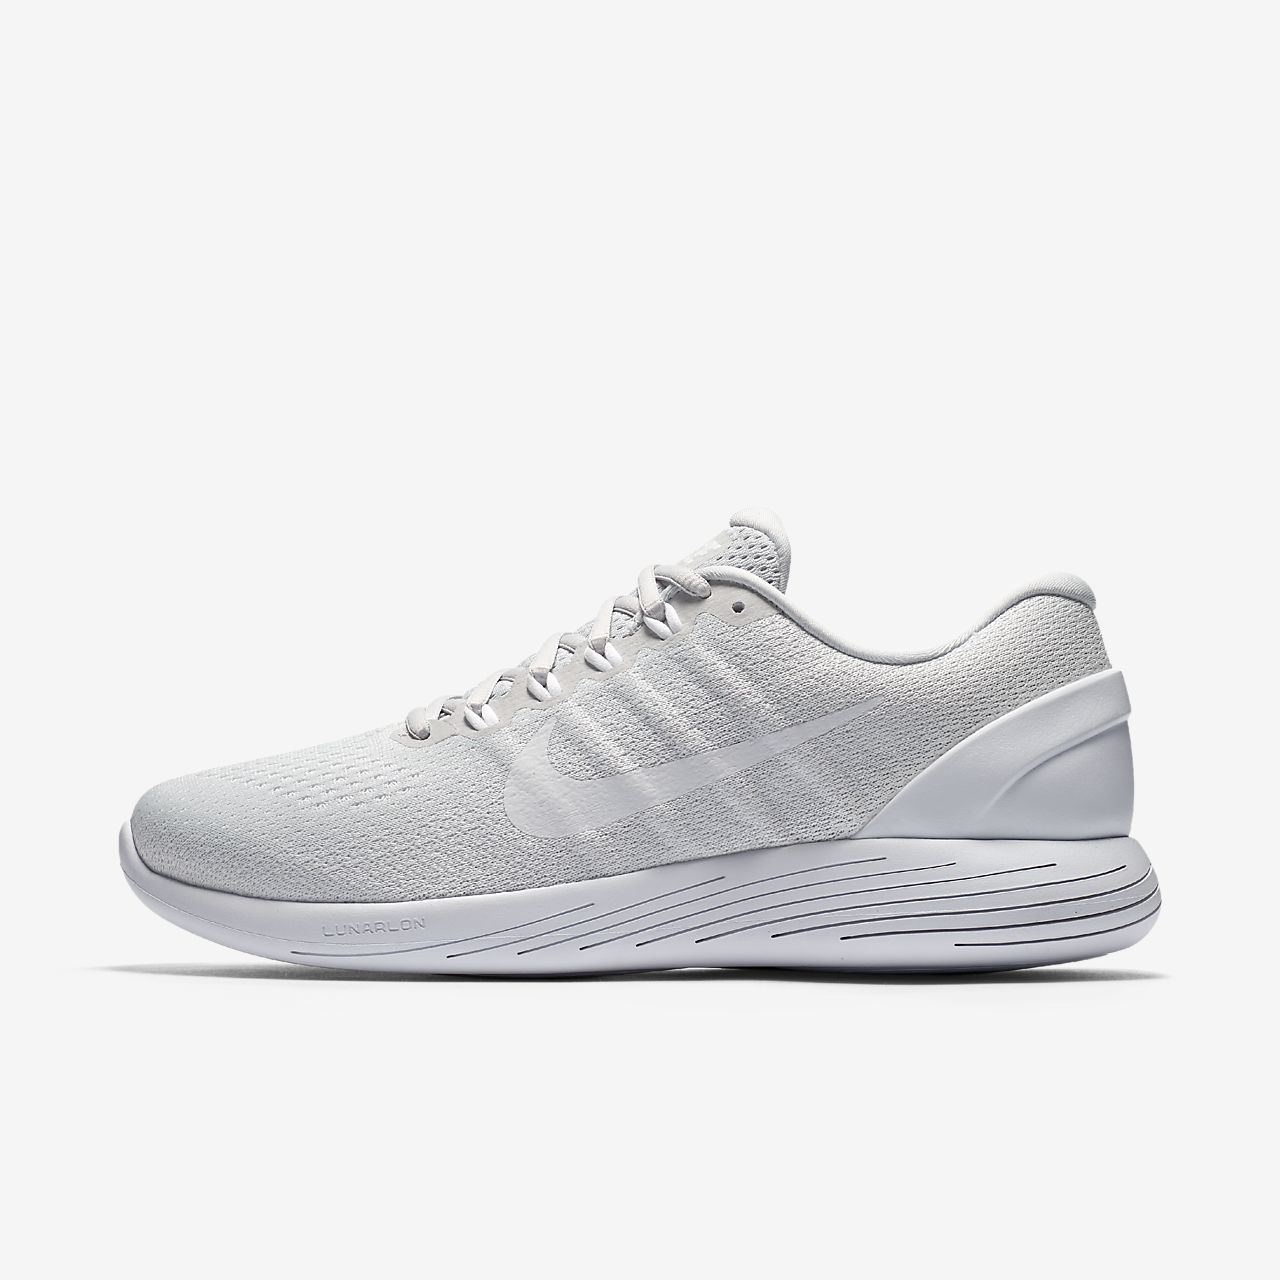 All White Running Shoes Mens - About 